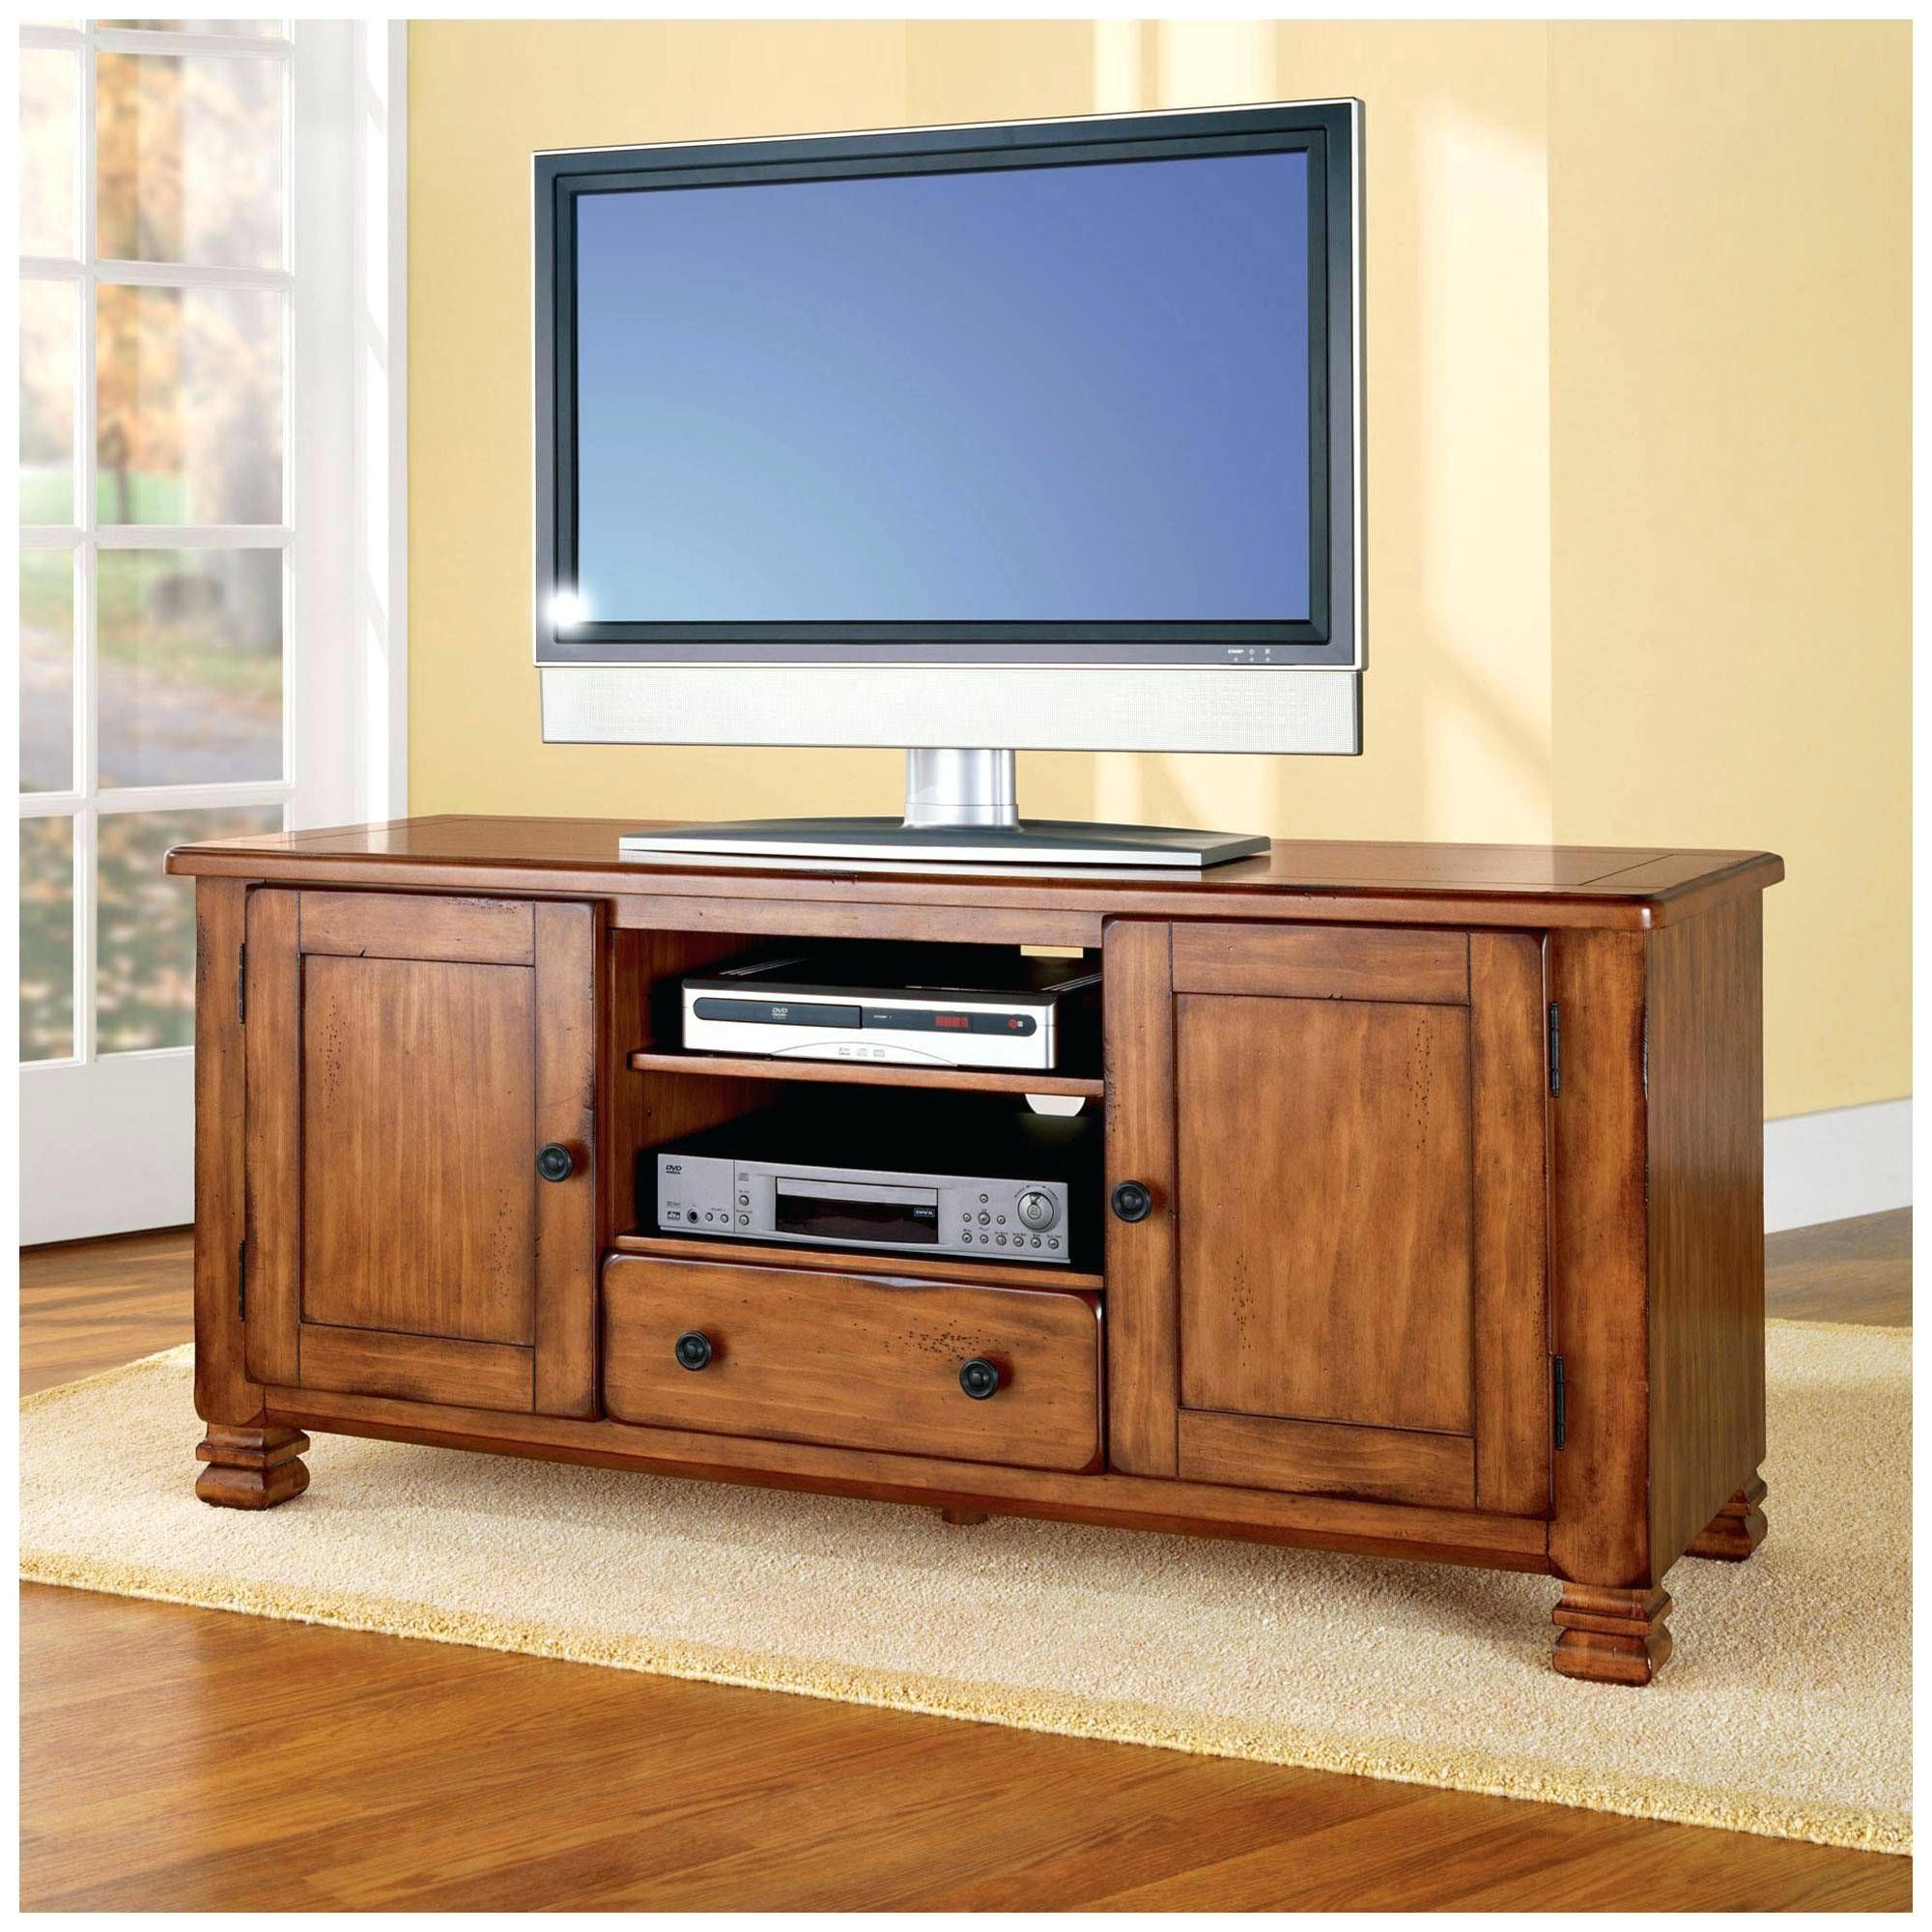 Tv Stand: Awesome Tall Oak Tv Stand Images. Furniture Ideas. Tall Inside Oak Tv Cabinets For Flat Screens (Photo 2 of 15)